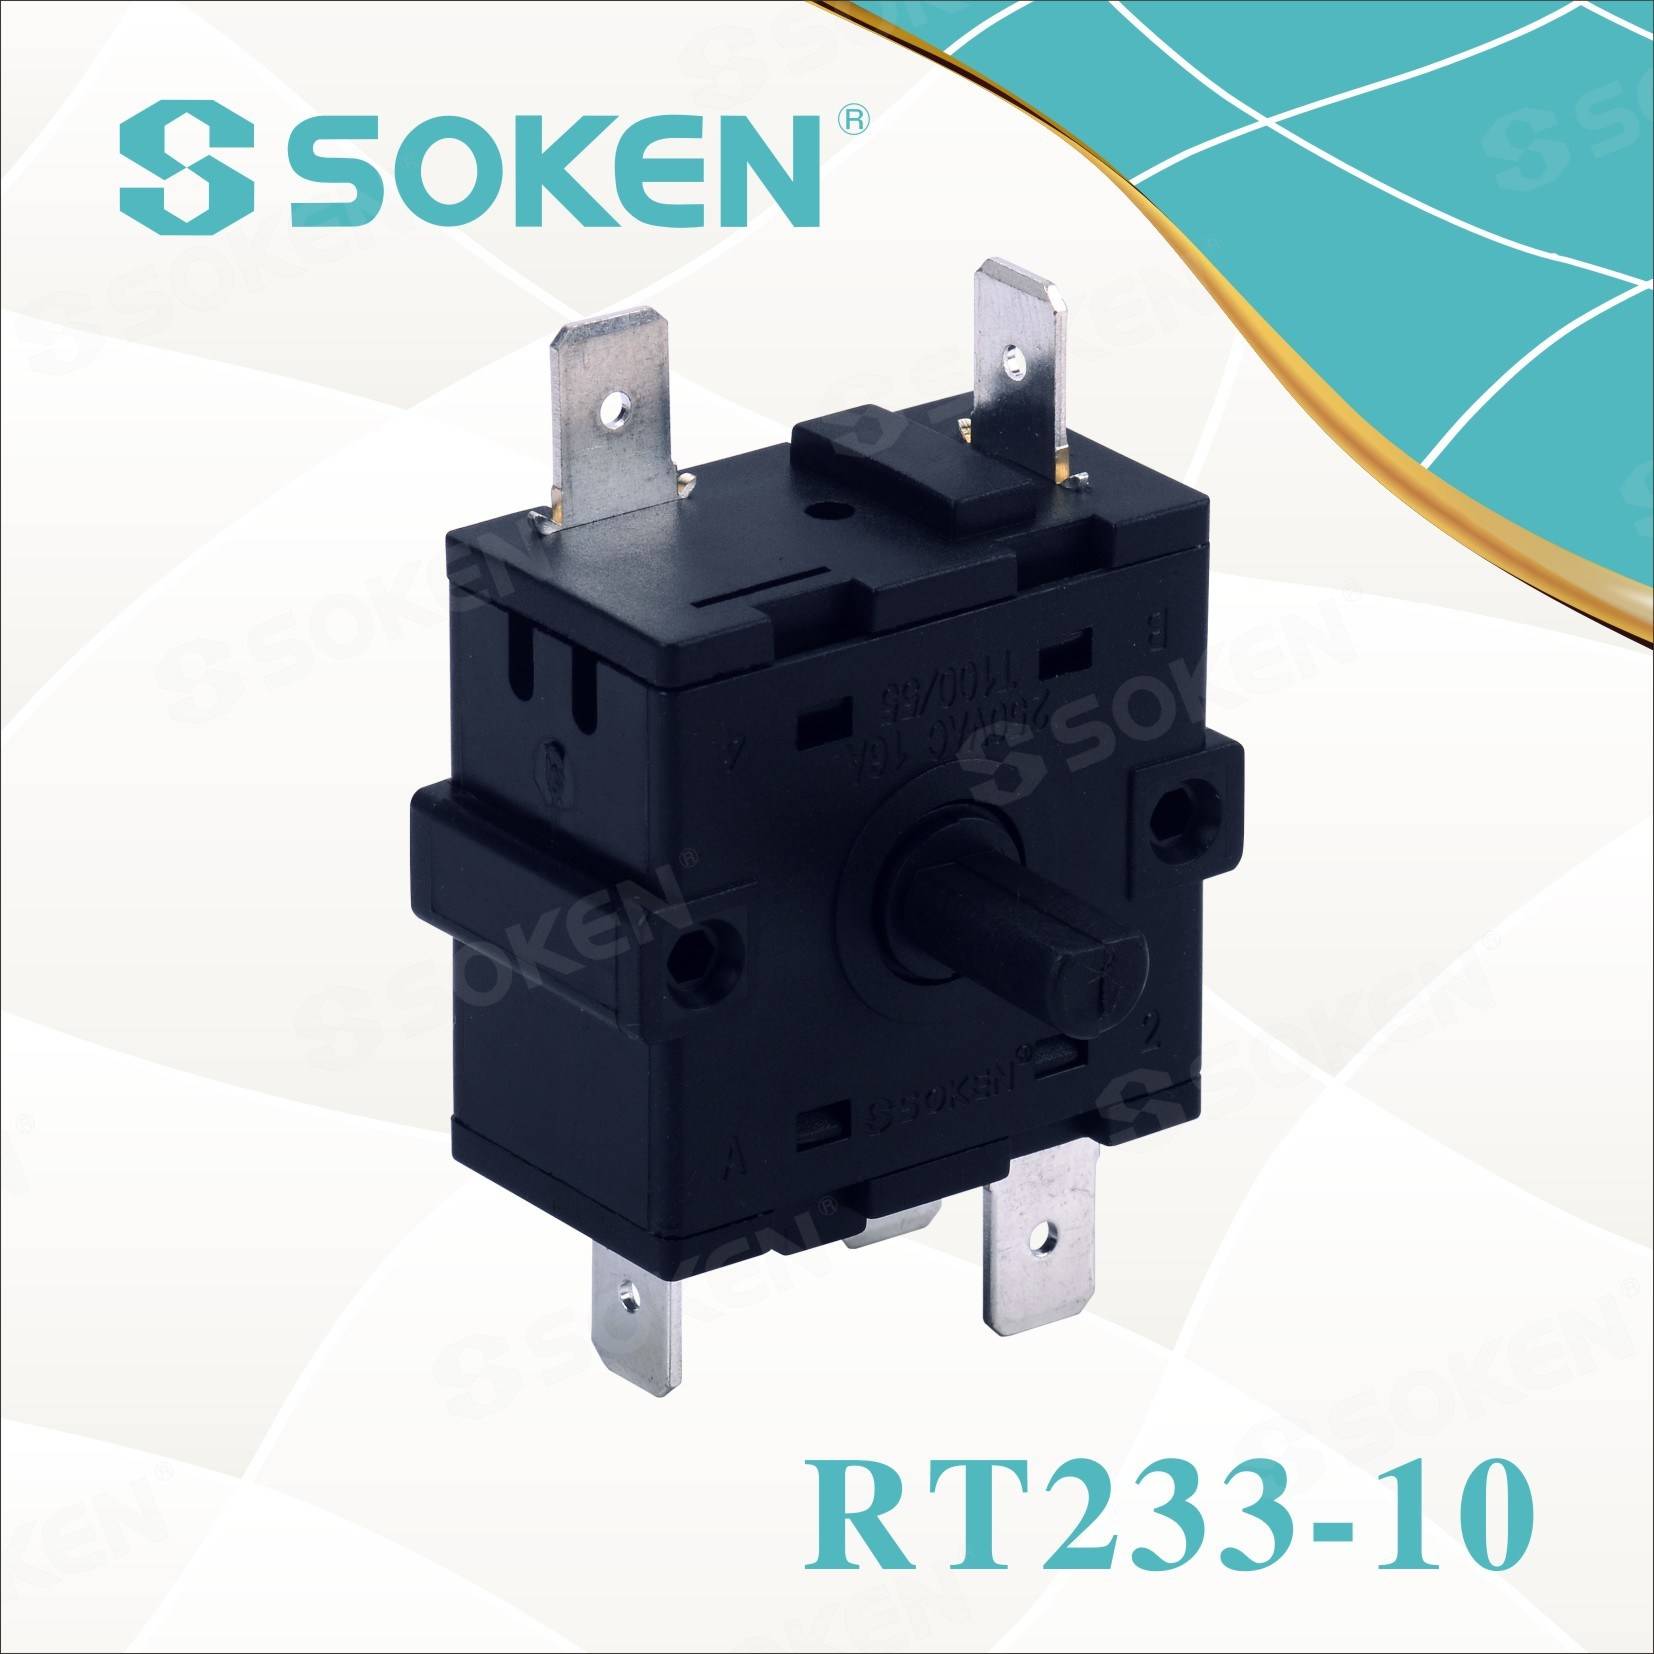 One of Hottest for Rocker Switch 12v -
 Soken 4 Position Cooker Rotary Switch – Master Soken Electrical